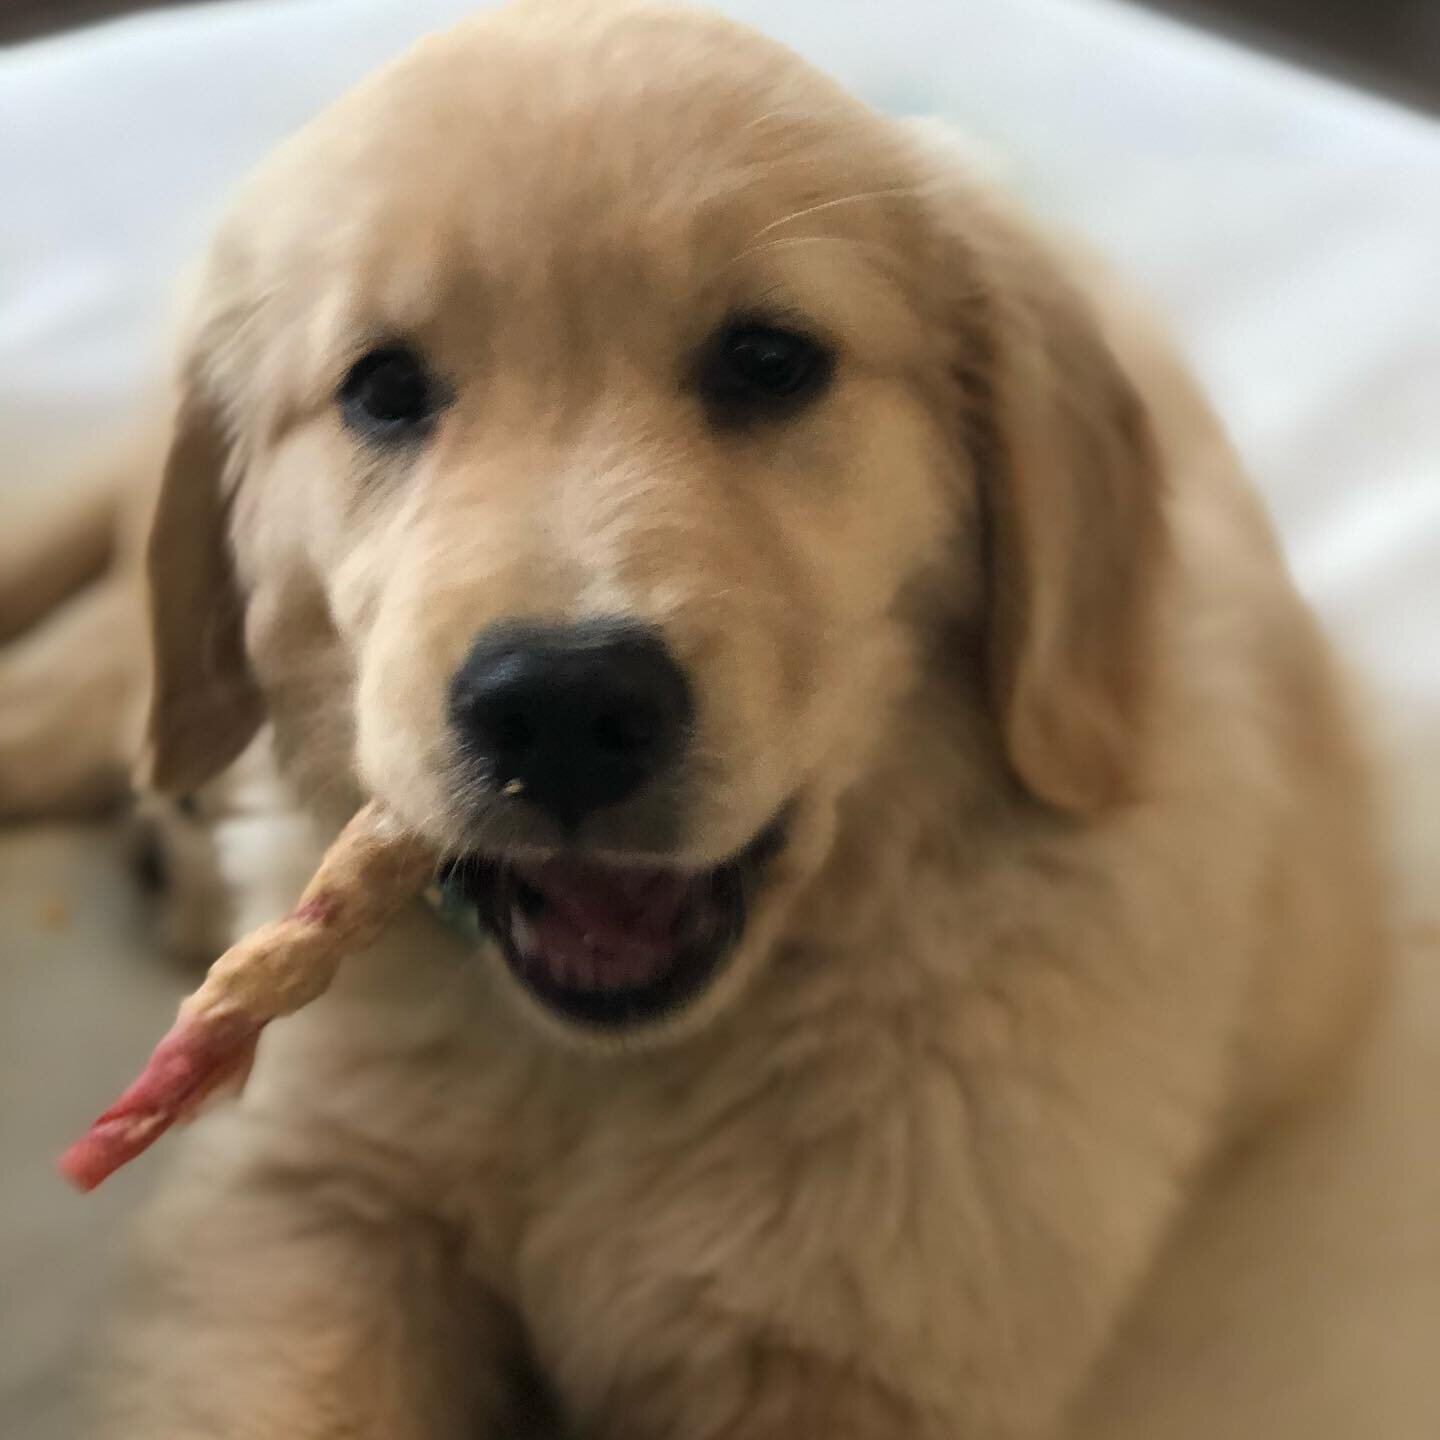 Molly just started her training last week and is doing exceptional for her parents. This photo encapsulates her entire being, all she wants is treats and affection😂 #goldenretriever #dogtraining #puppiesofinstagram #puppies #cutie #goodgirl #treatyo